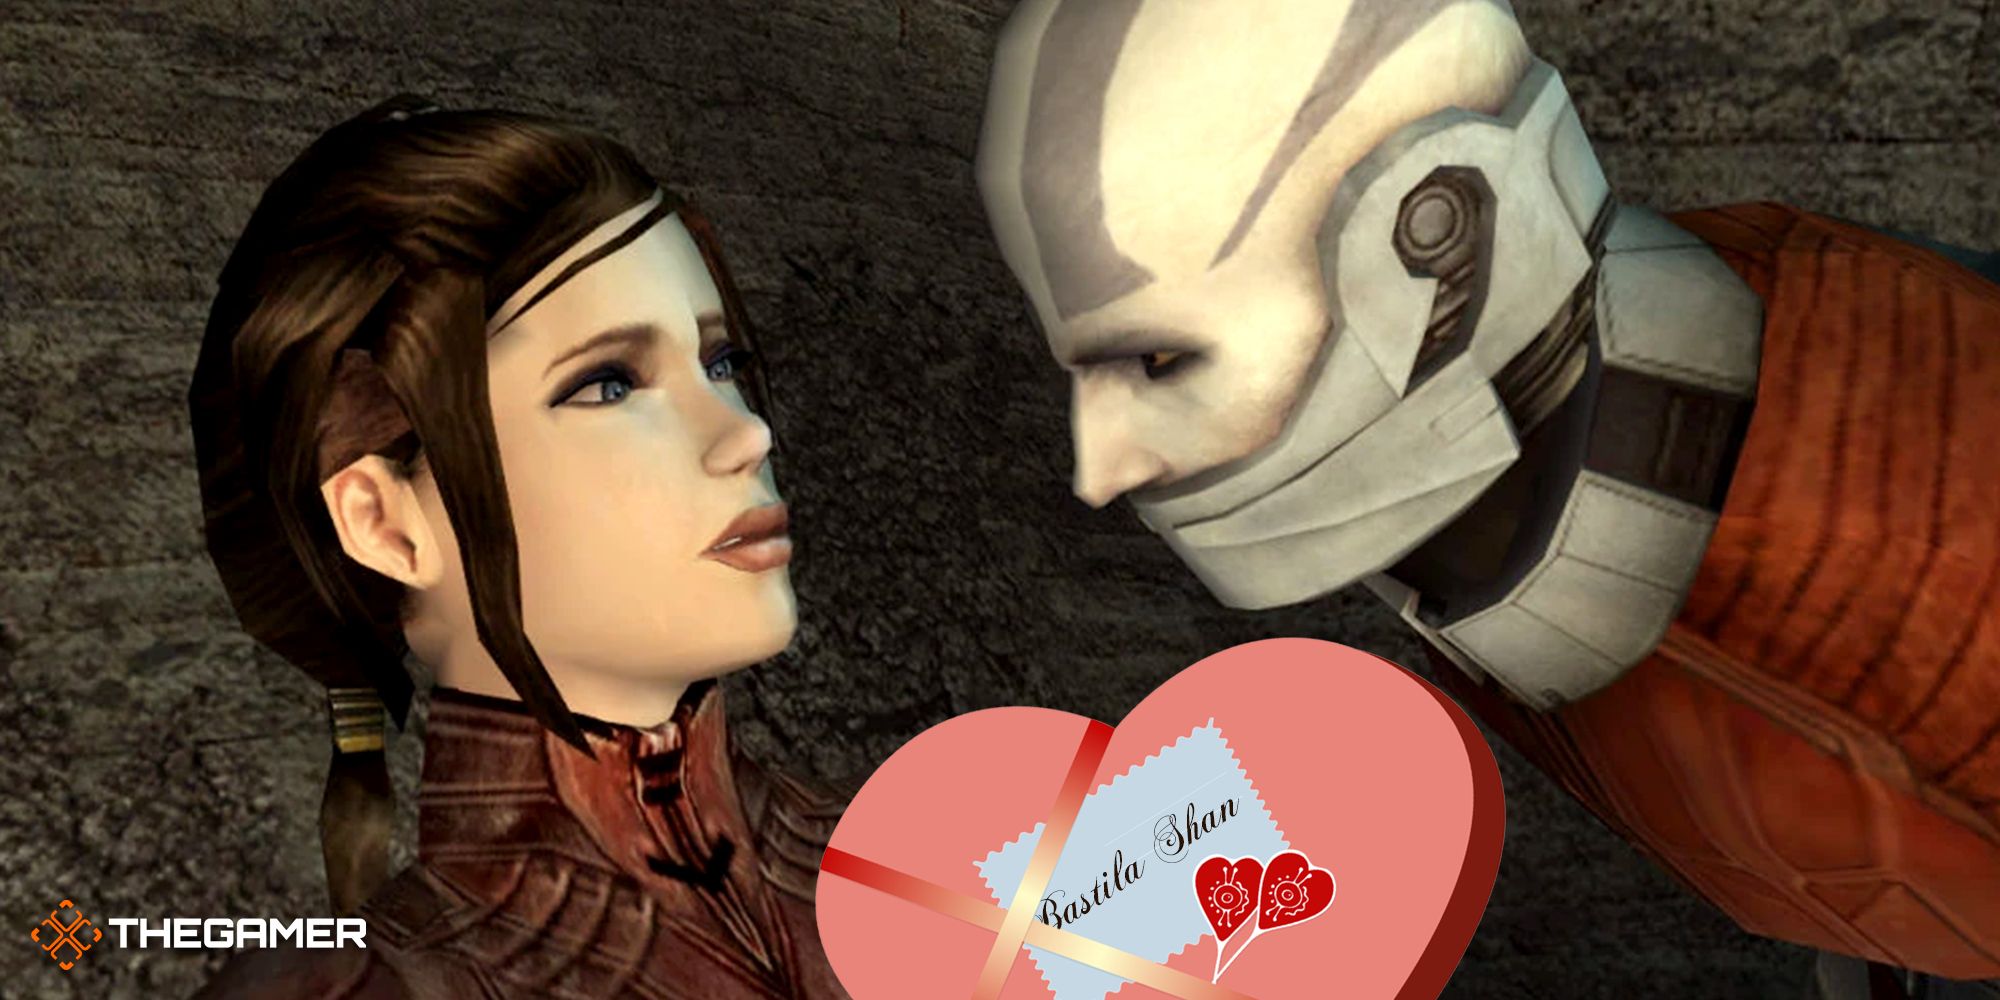 5-Star Wars KOTOR How To Romance Characters